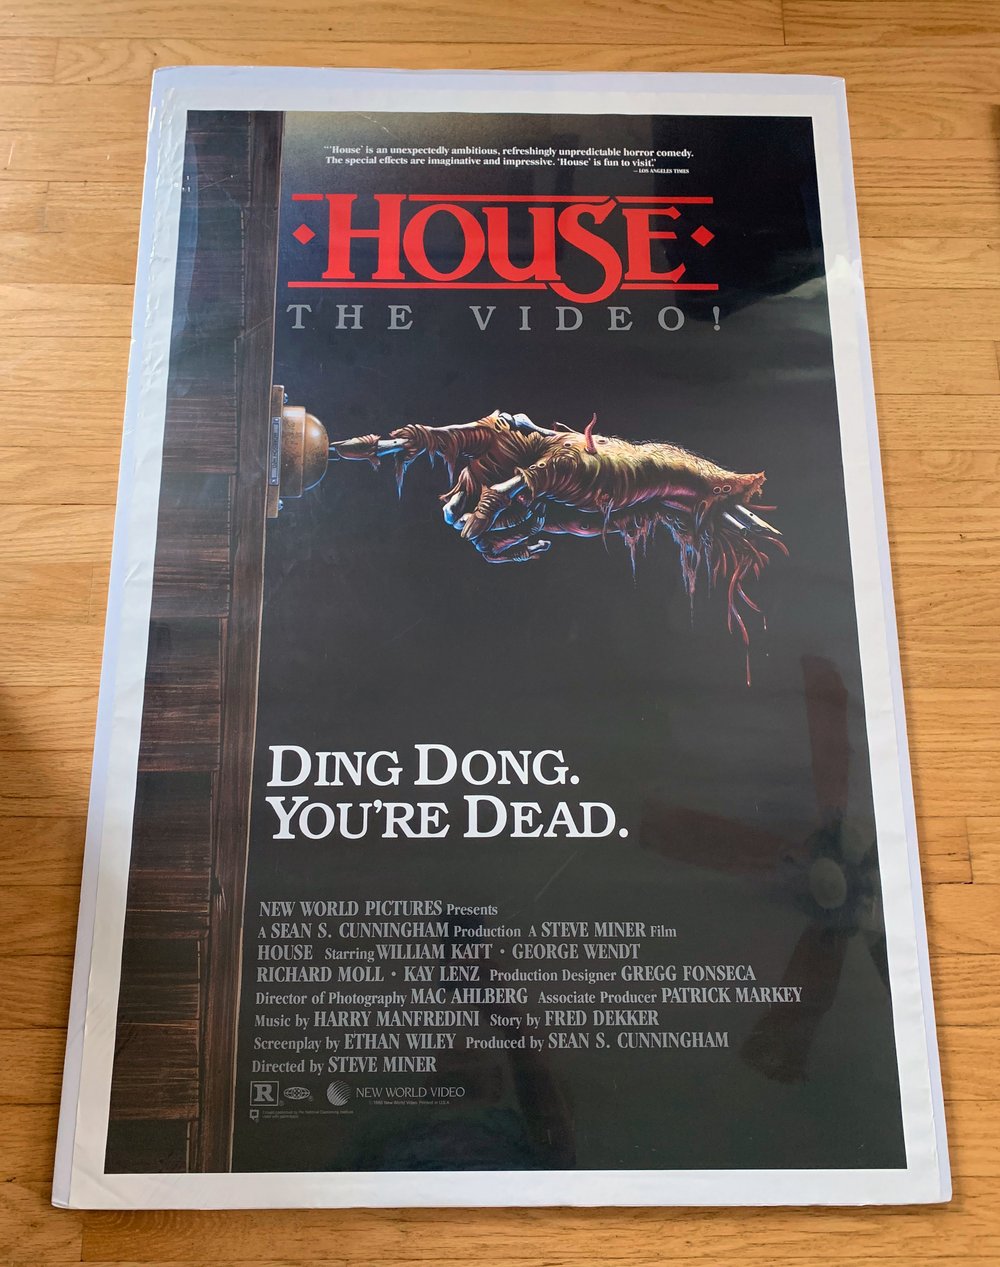 1985 HOUSE Original New World Video Promotional One Sheet Movie Poster 